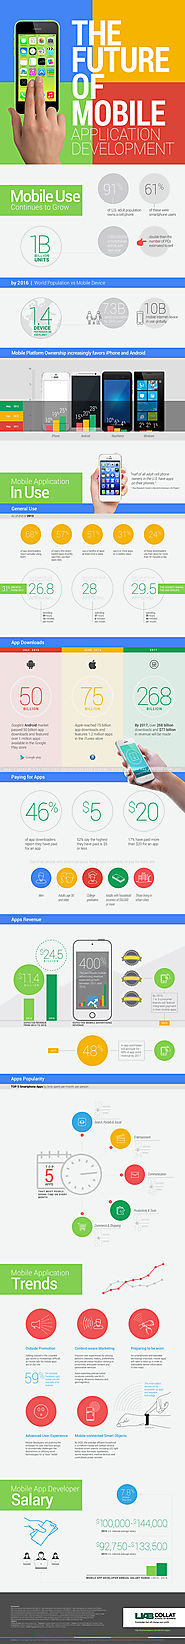 By 2017, the App Market Will Be a $77 Billion Industry (Infographic)